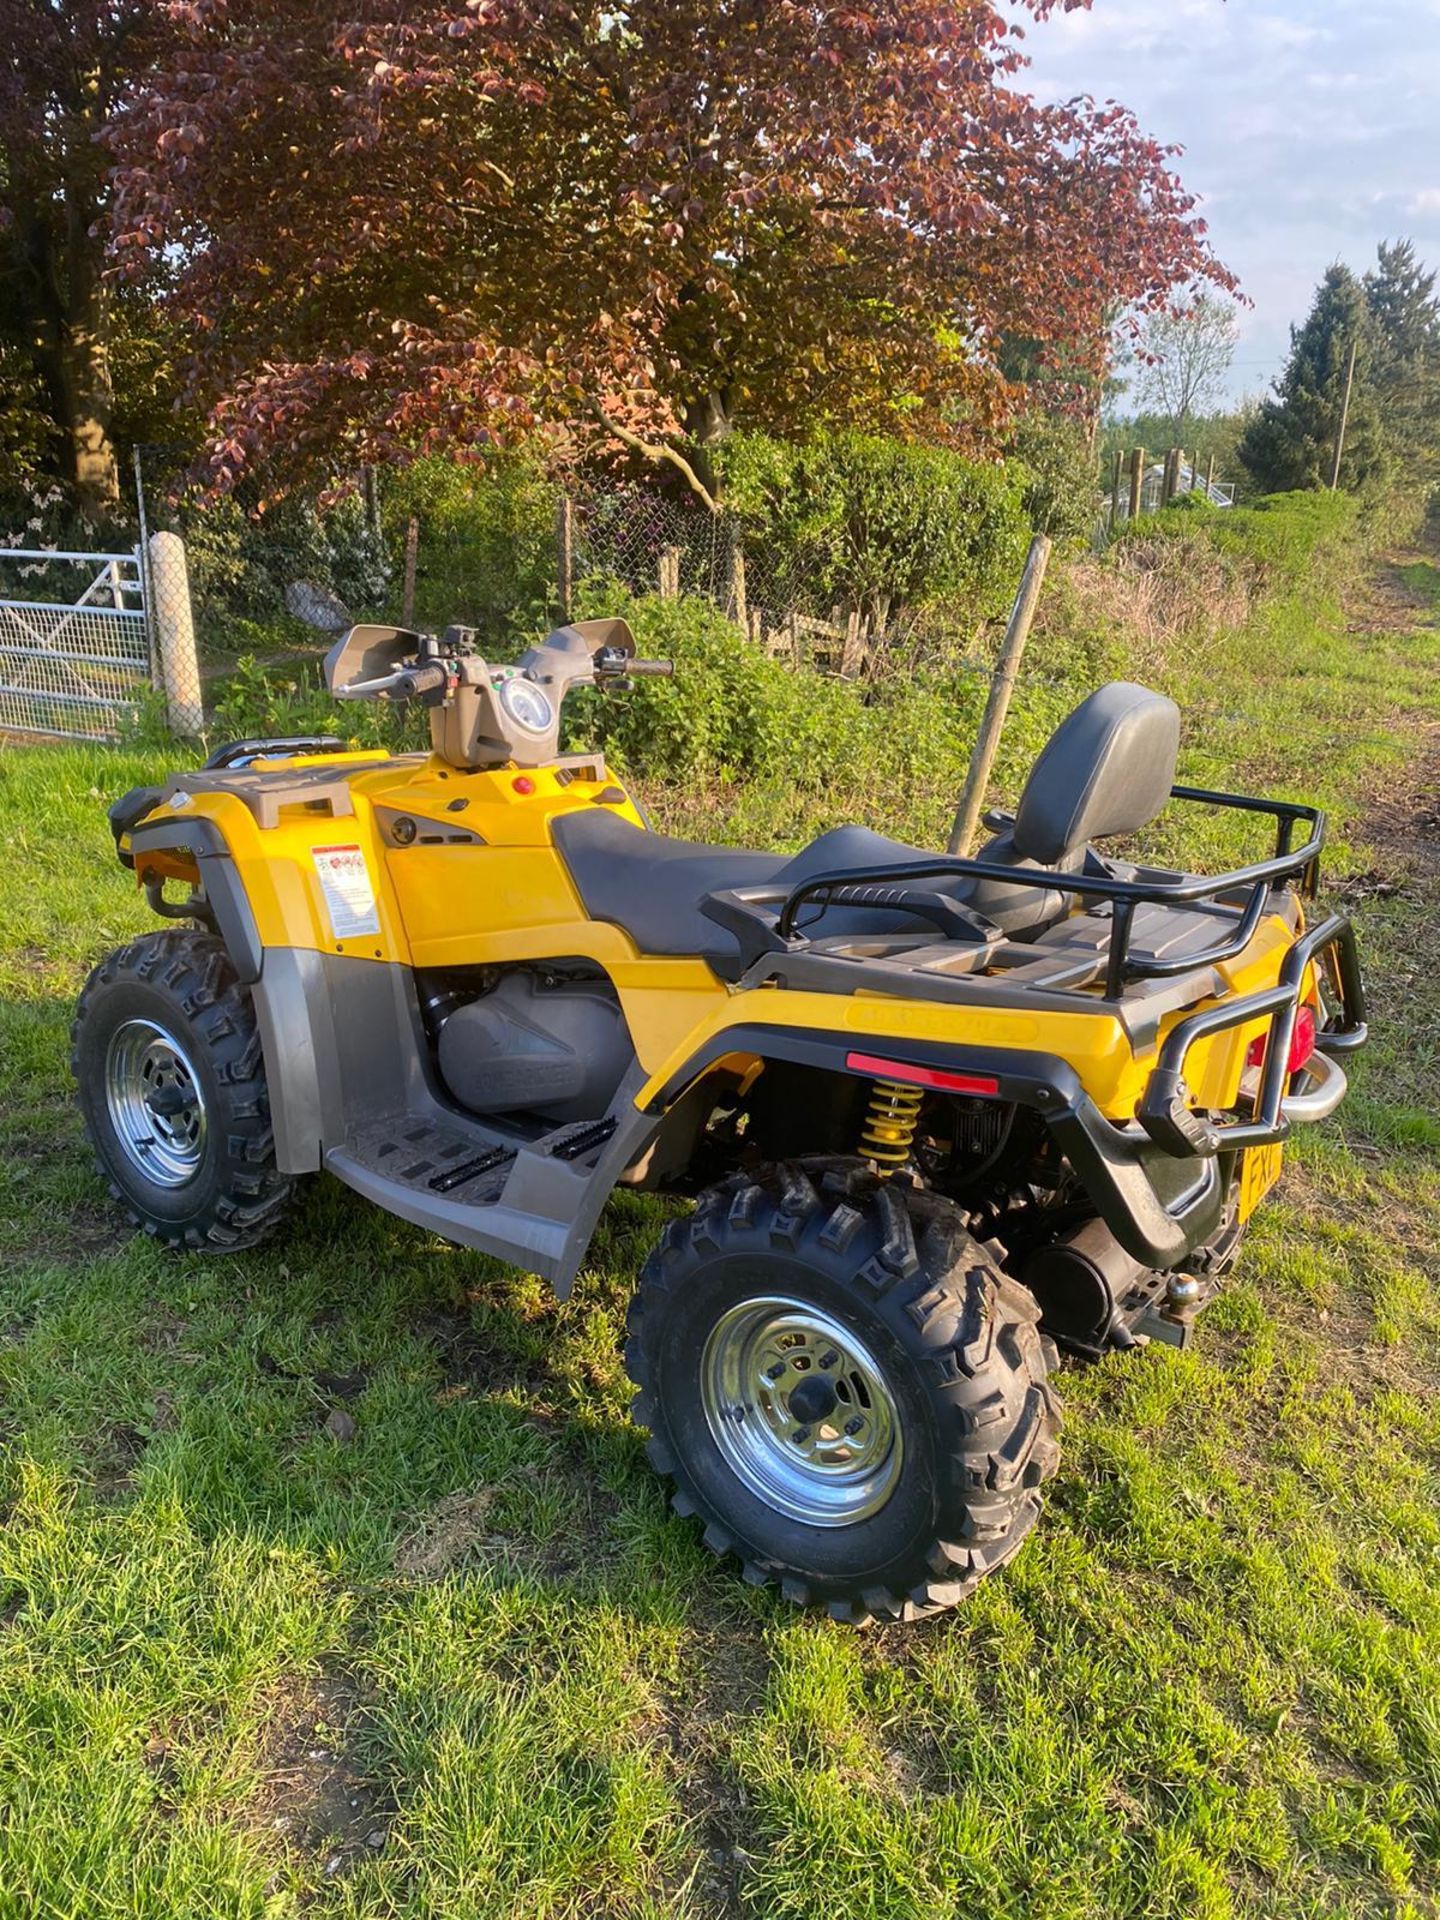 BOMBARDIER CAN AM 2 SEATER QUAD BIKE ROAD REGISTERED, SELECTABLE 4 WHEEL DRIVE *NO VAT* - Image 5 of 10